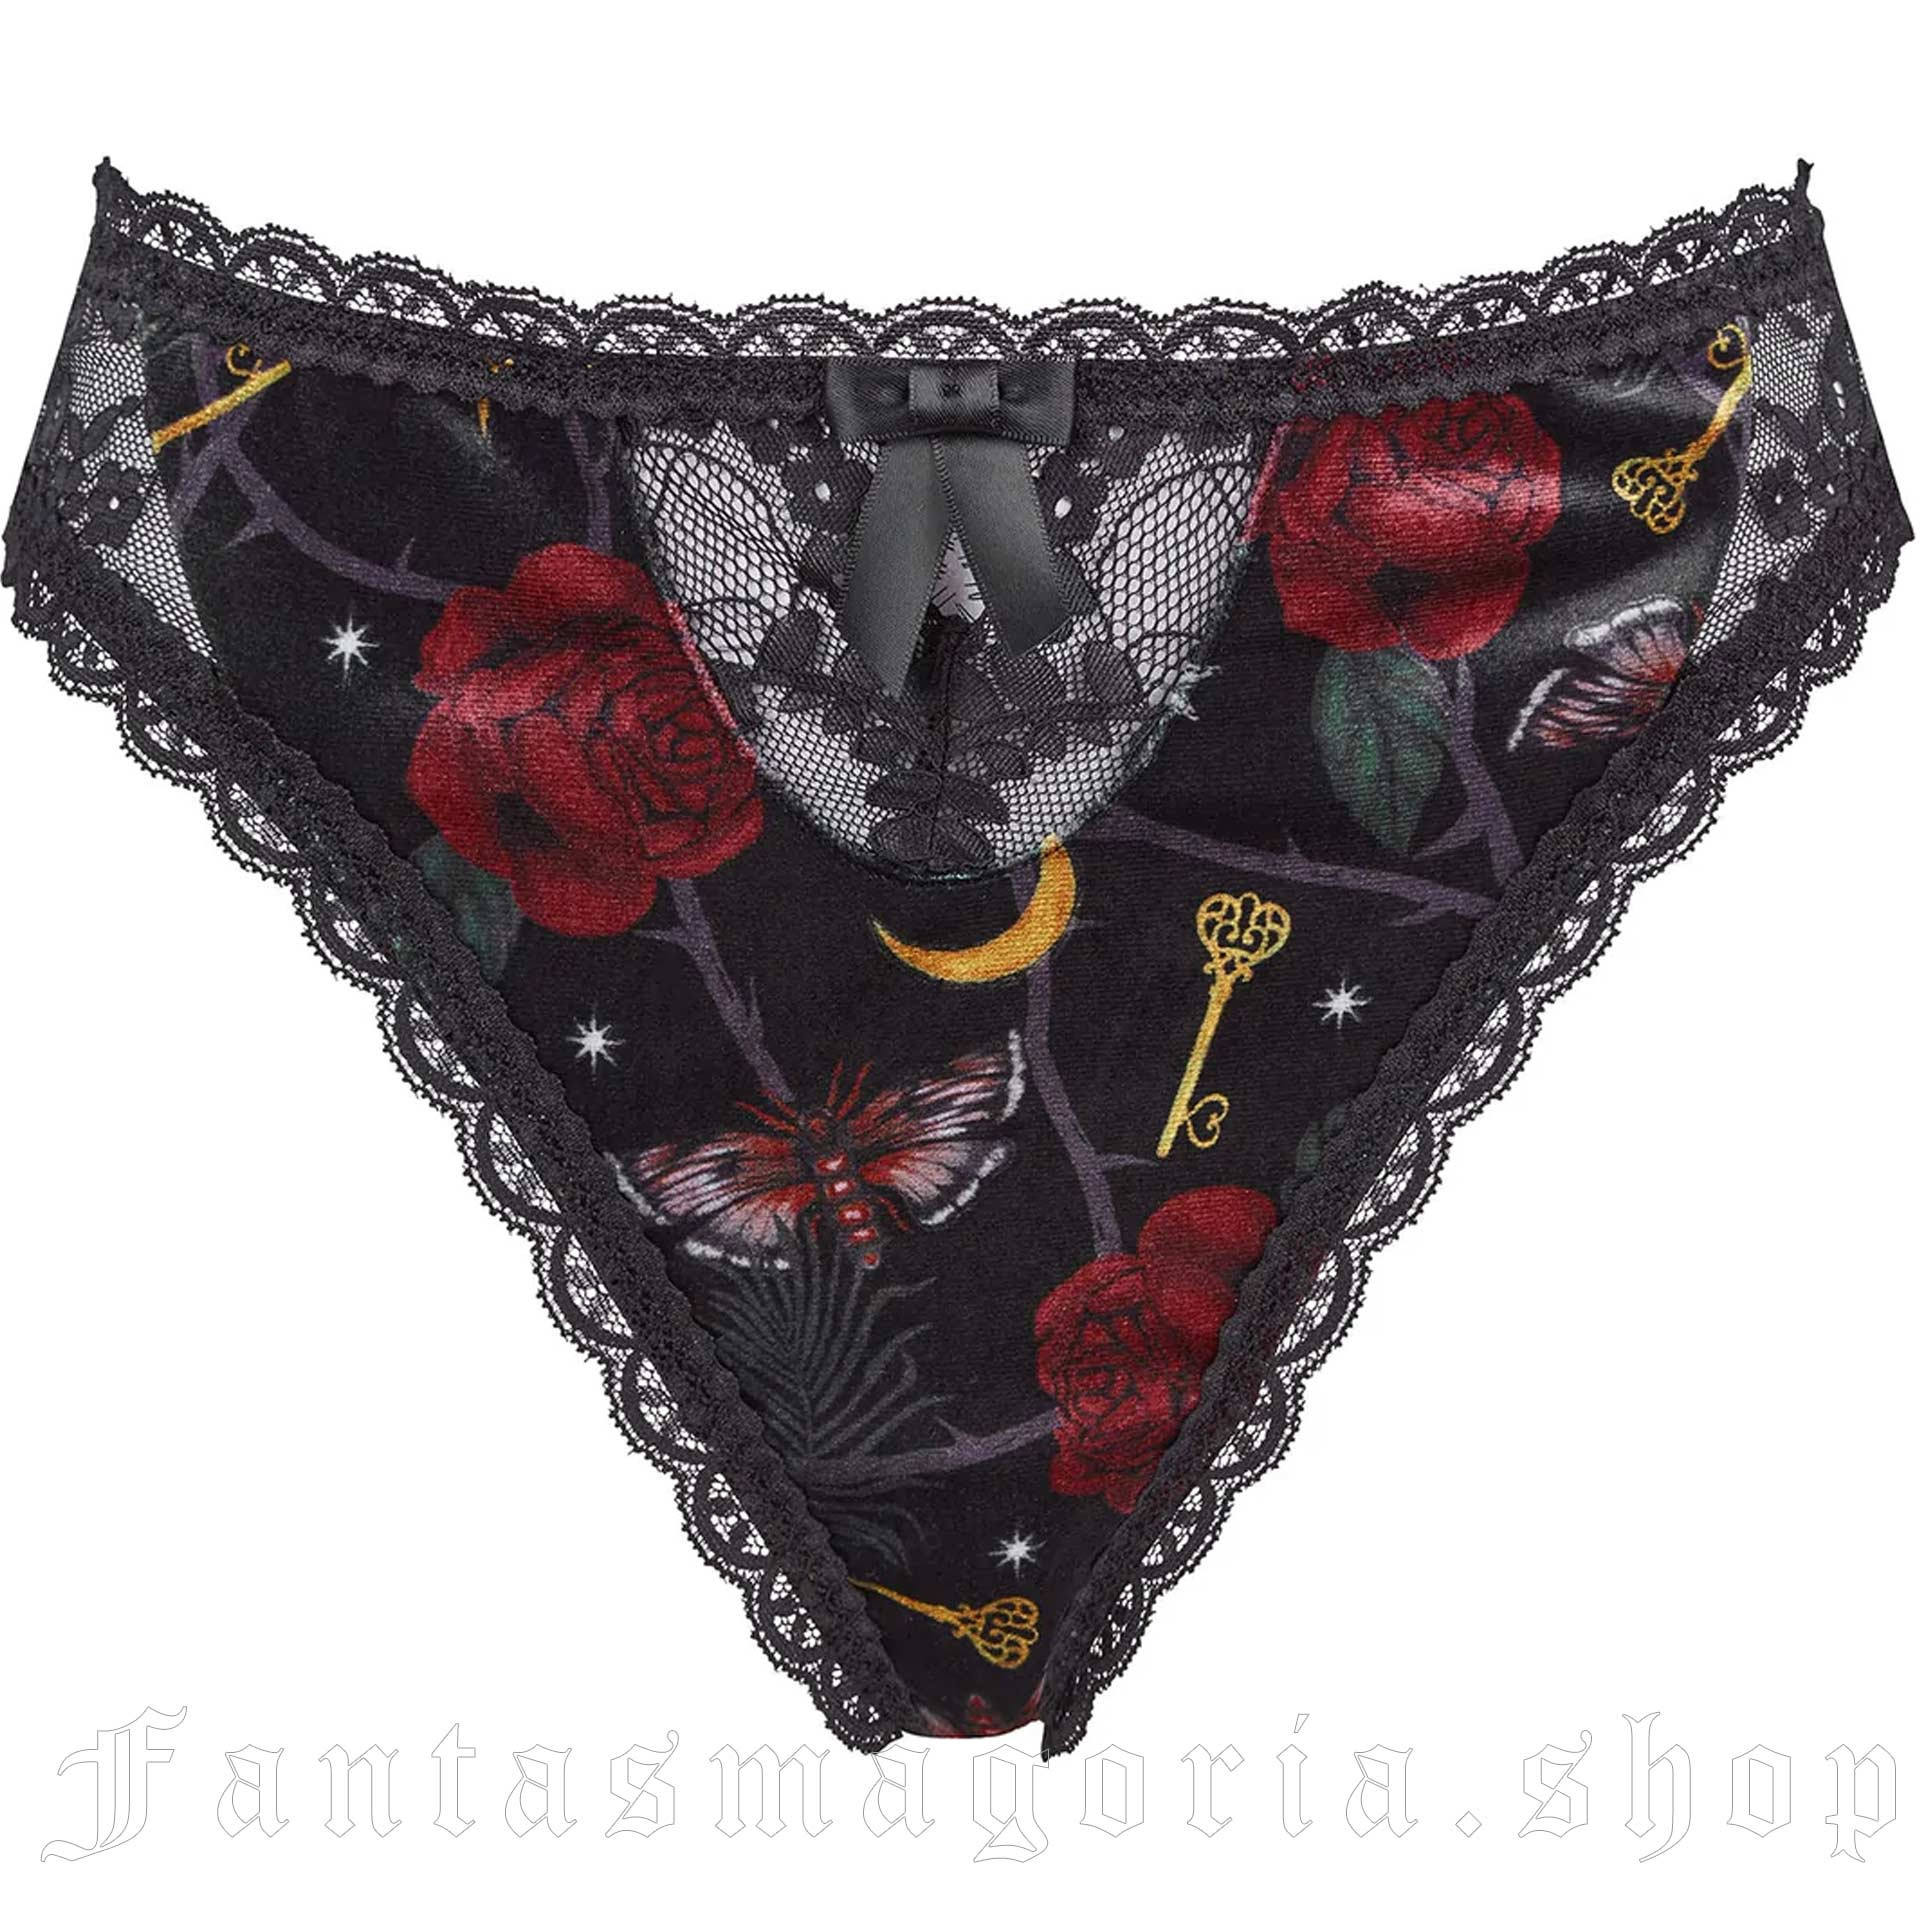 Enchanted Maiden Panty